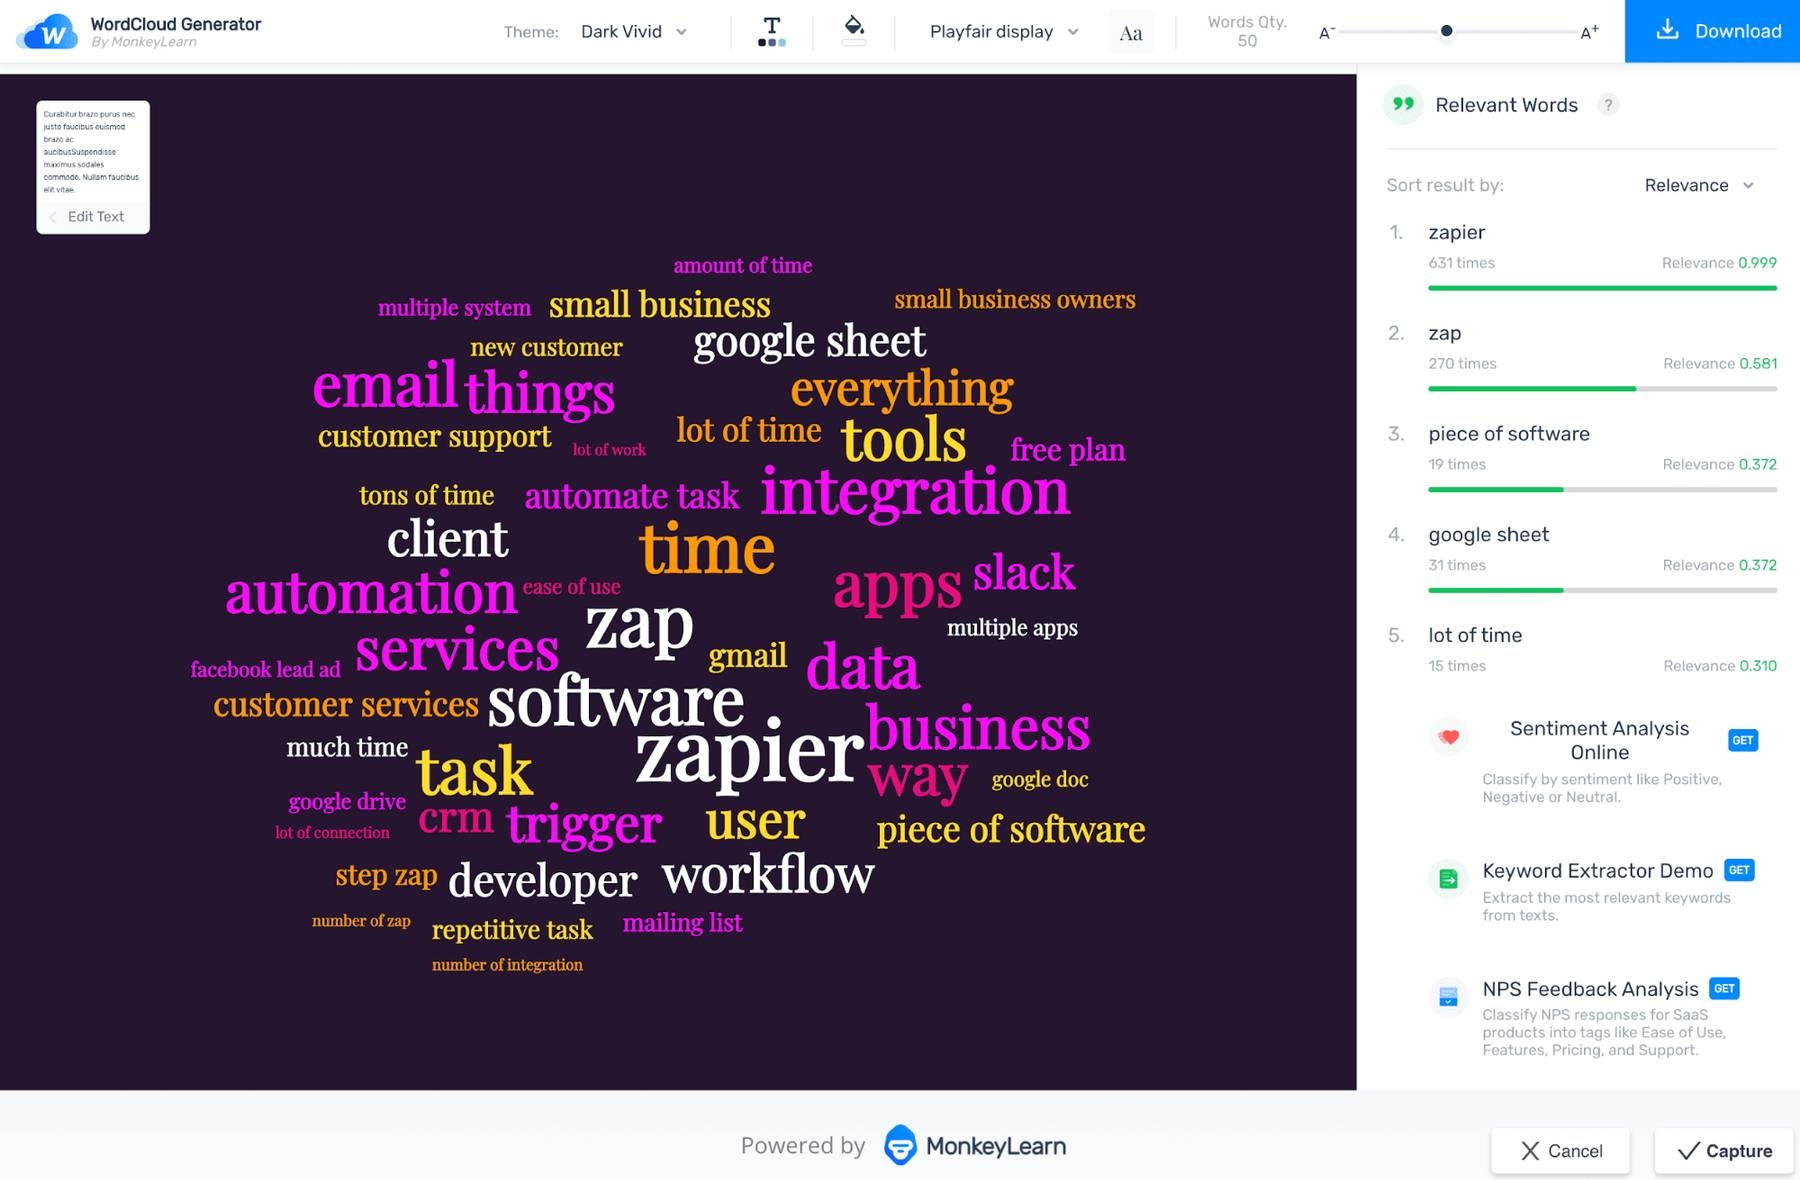 MonkeyLearn's word cloud customized by color and word quantity